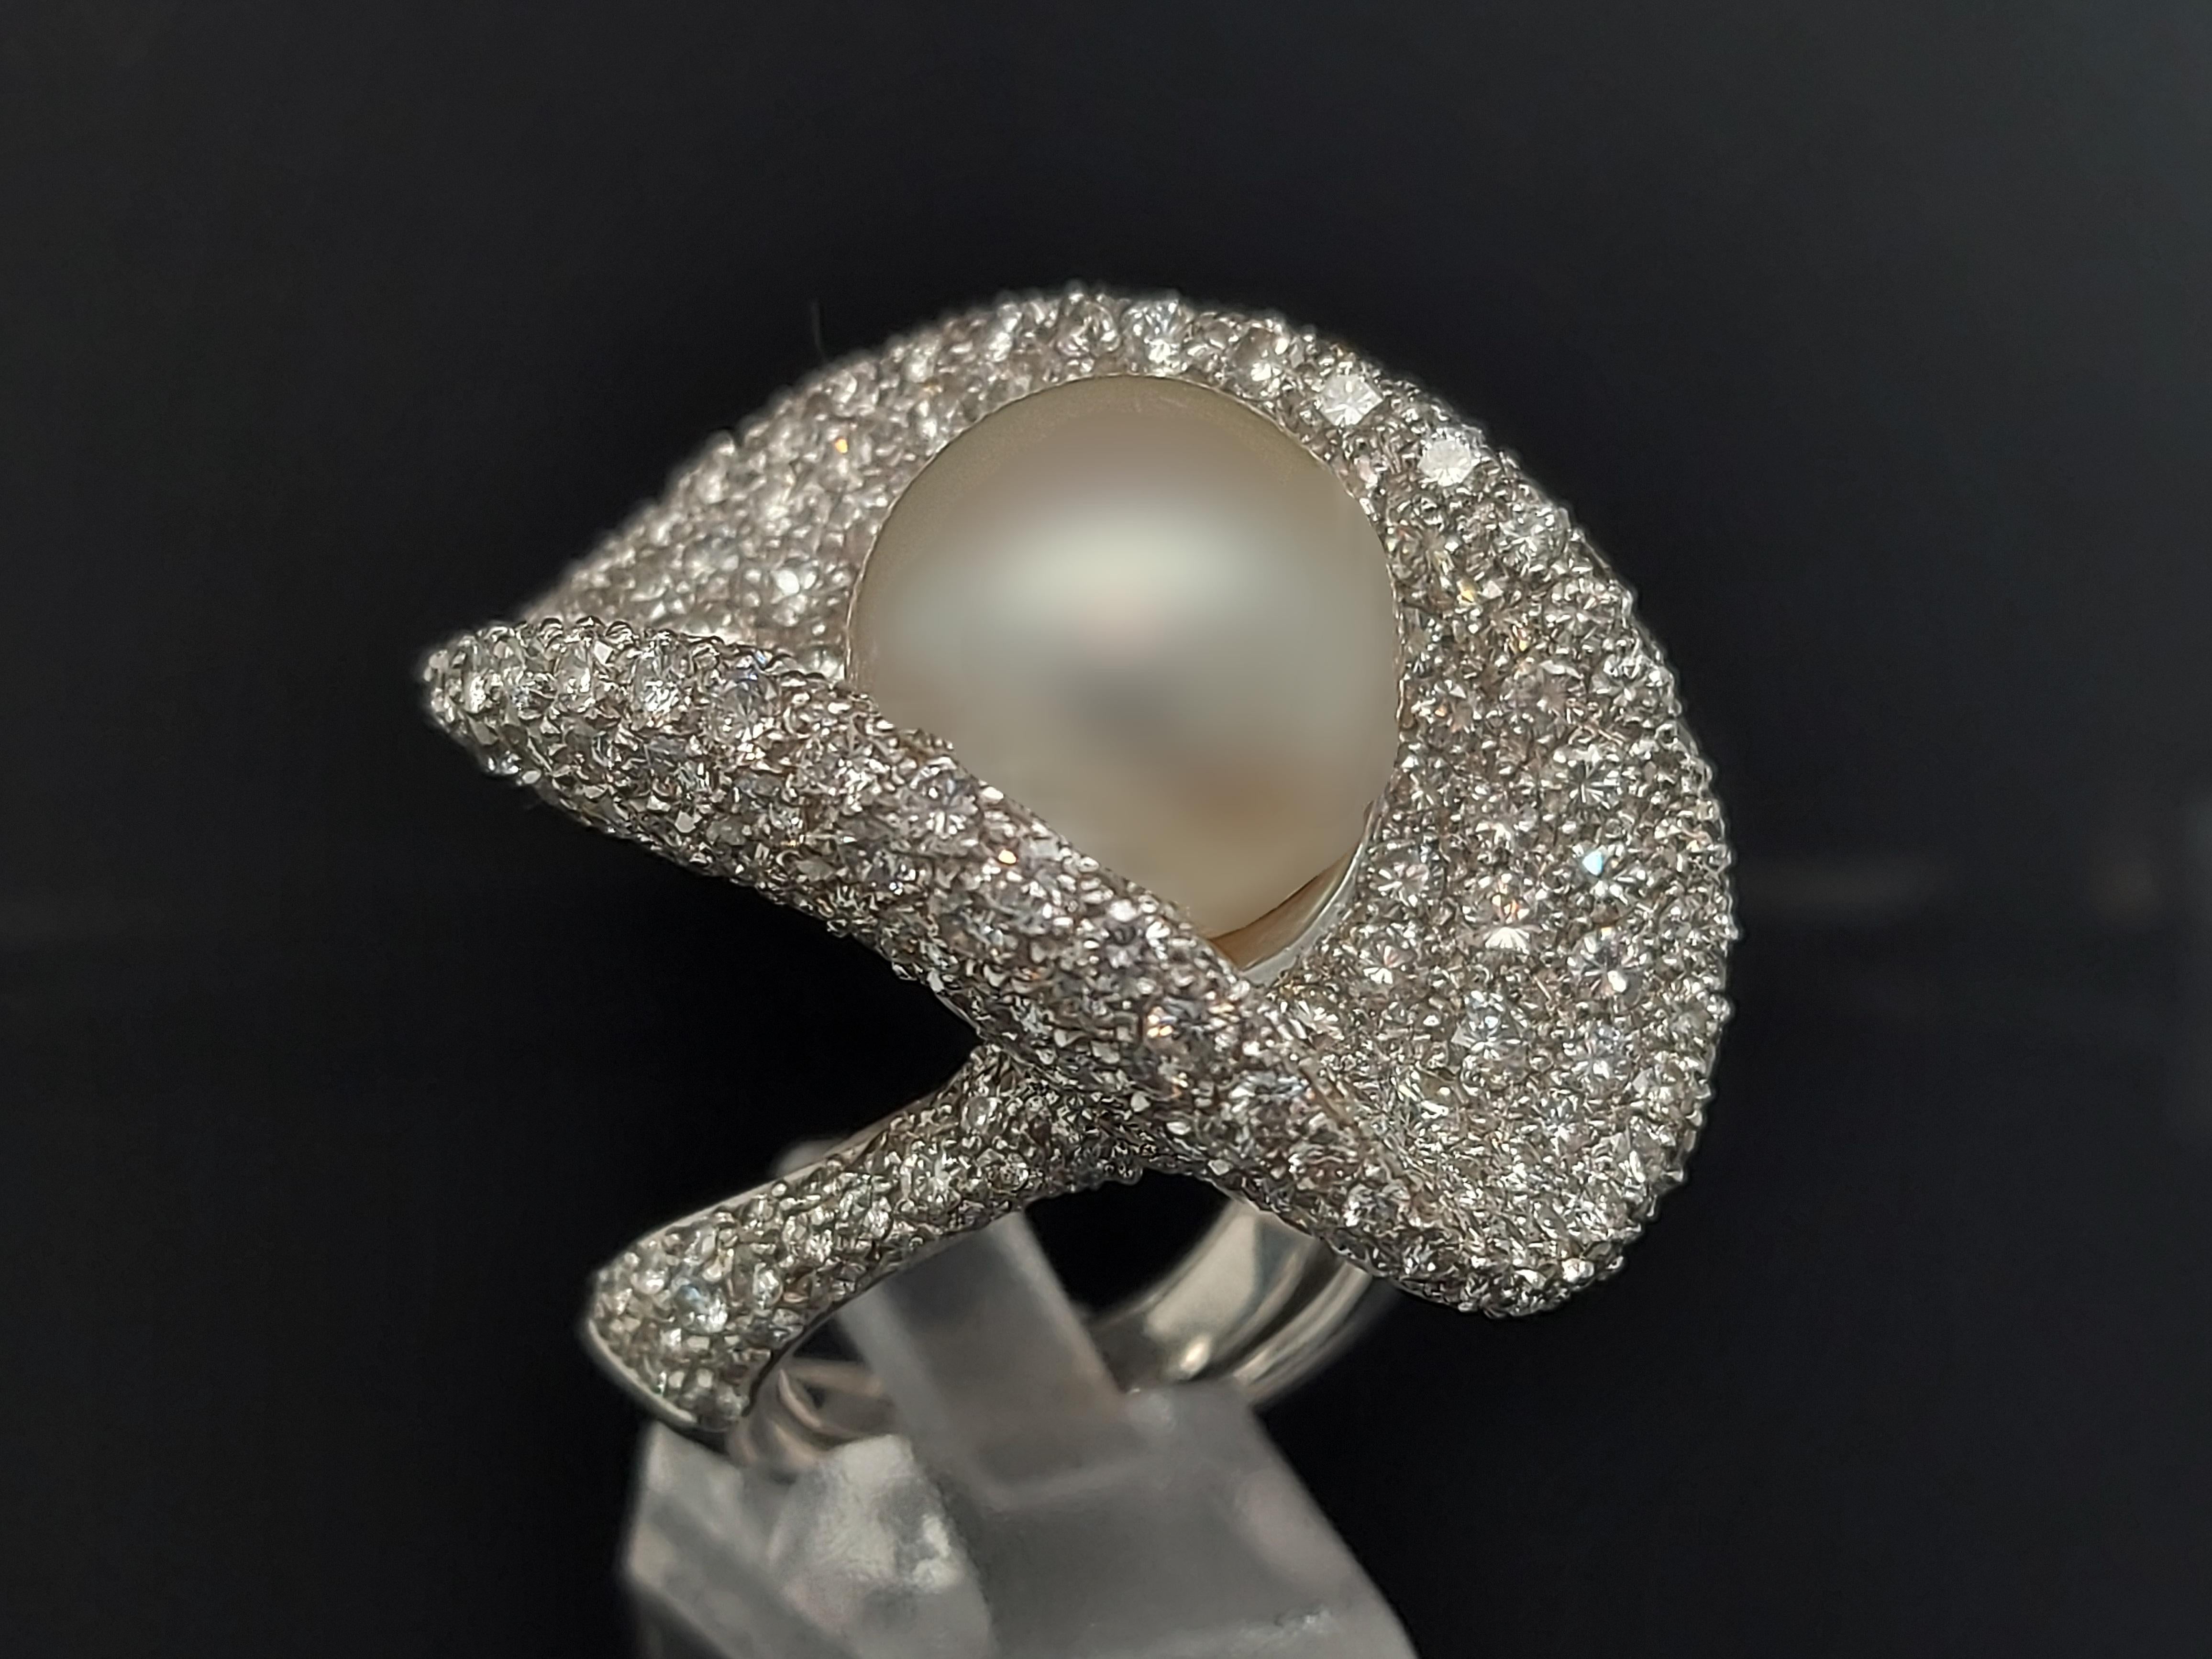 Women's or Men's Magnificent 18 Karat White Gold Ring with 14.5 Carat Diamonds and a Big Pearl For Sale